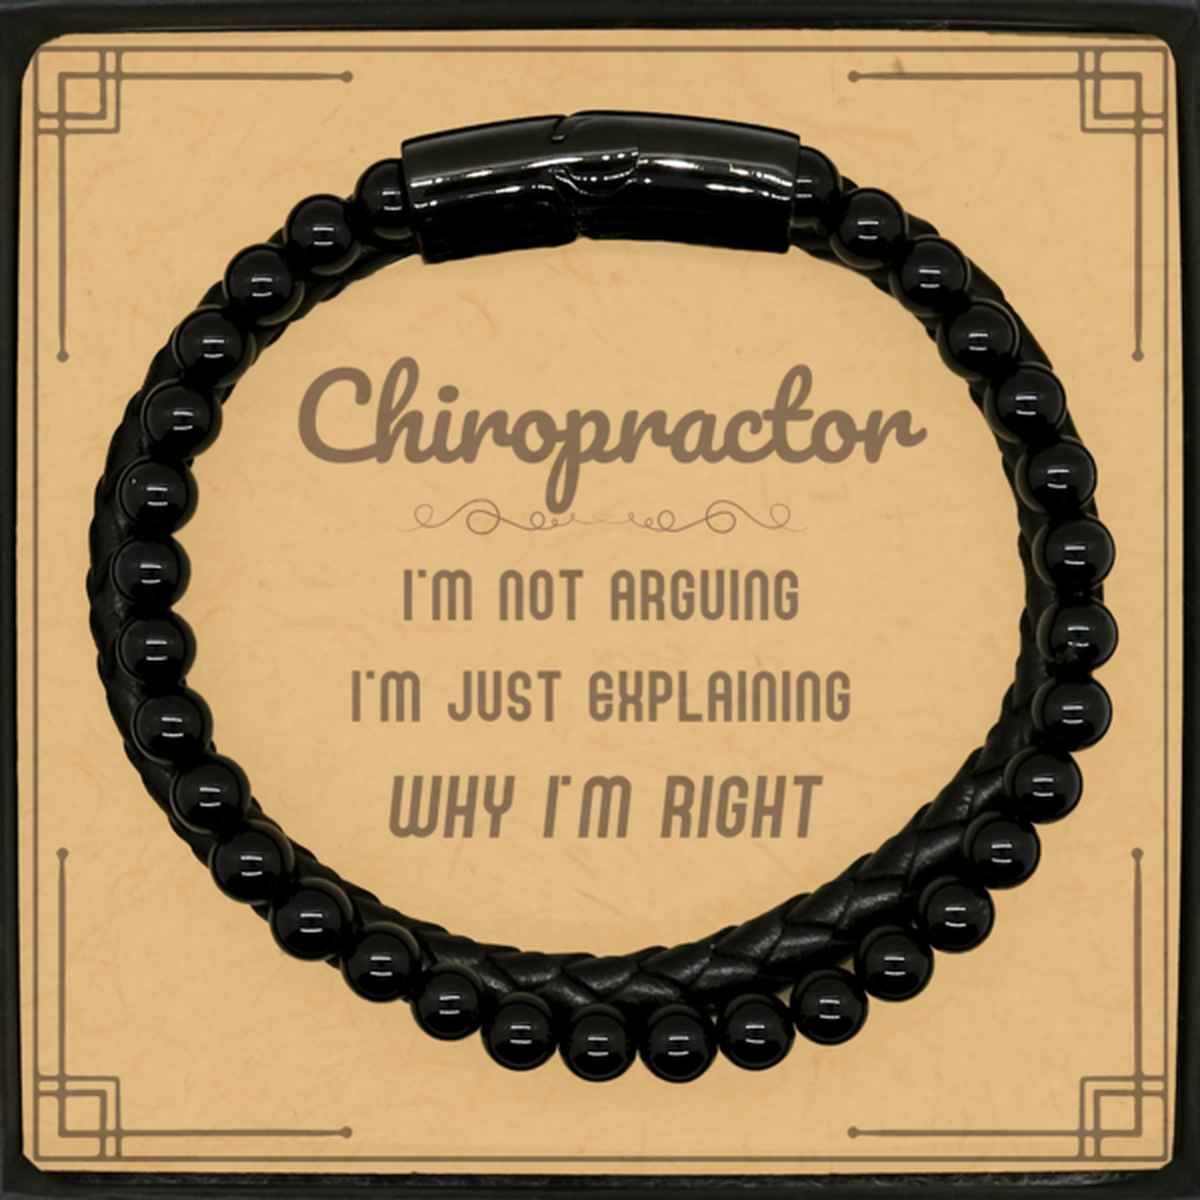 Chiropractor I'm not Arguing. I'm Just Explaining Why I'm RIGHT Stone Leather Bracelets, Funny Saying Quote Chiropractor Gifts For Chiropractor Message Card Graduation Birthday Christmas Gifts for Men Women Coworker